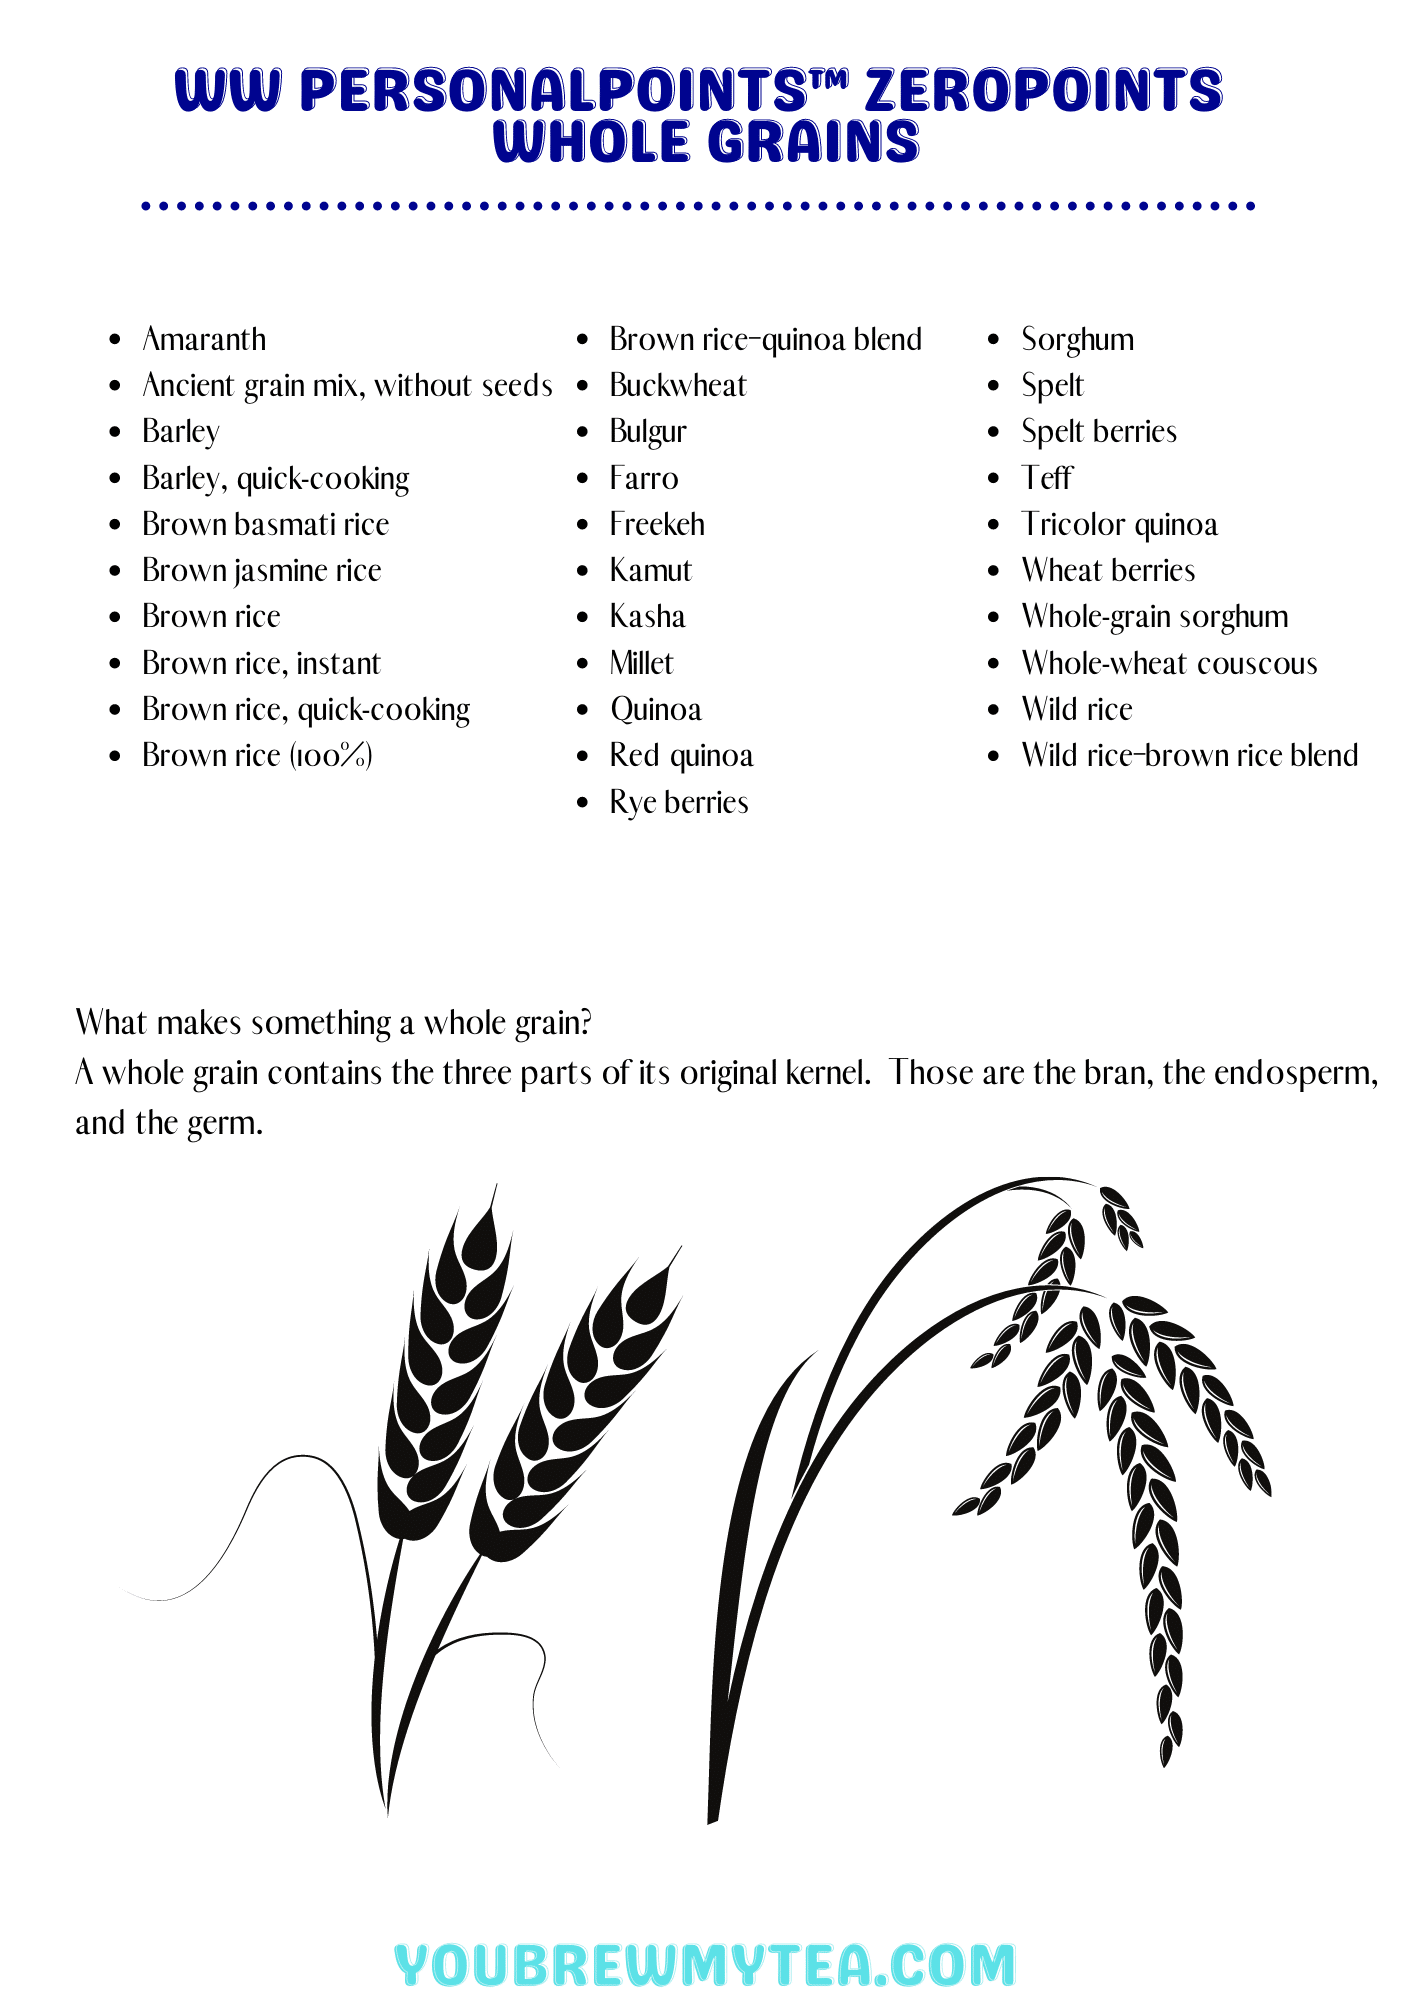 image of a printable with lists of grains